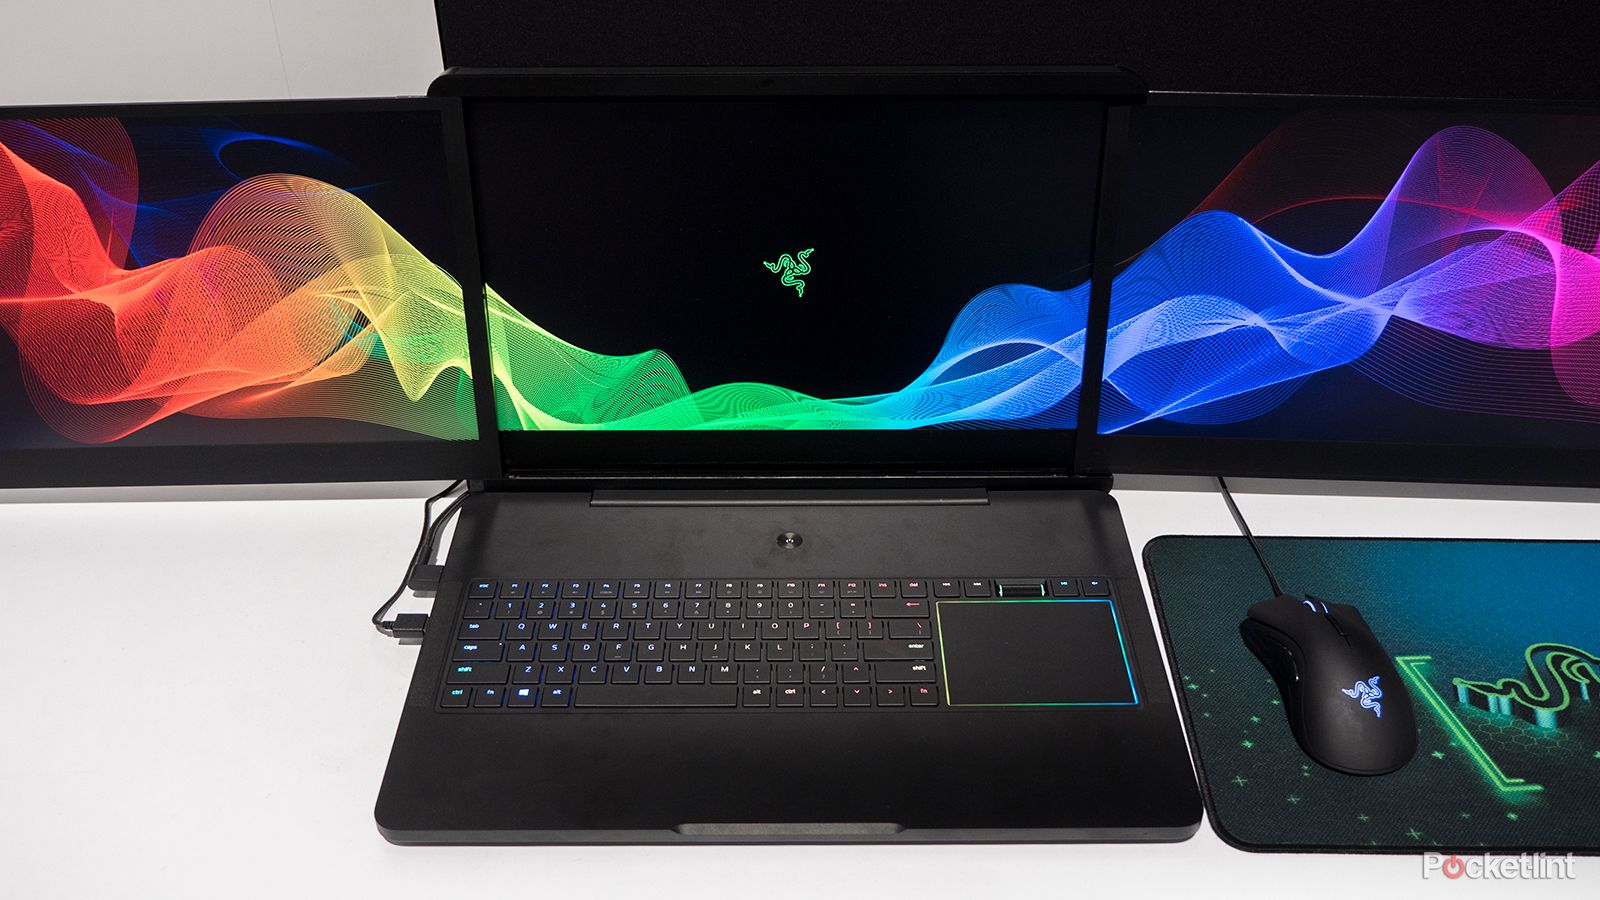 razer project valerie crazy gaming laptop concept packs in three screens image 1